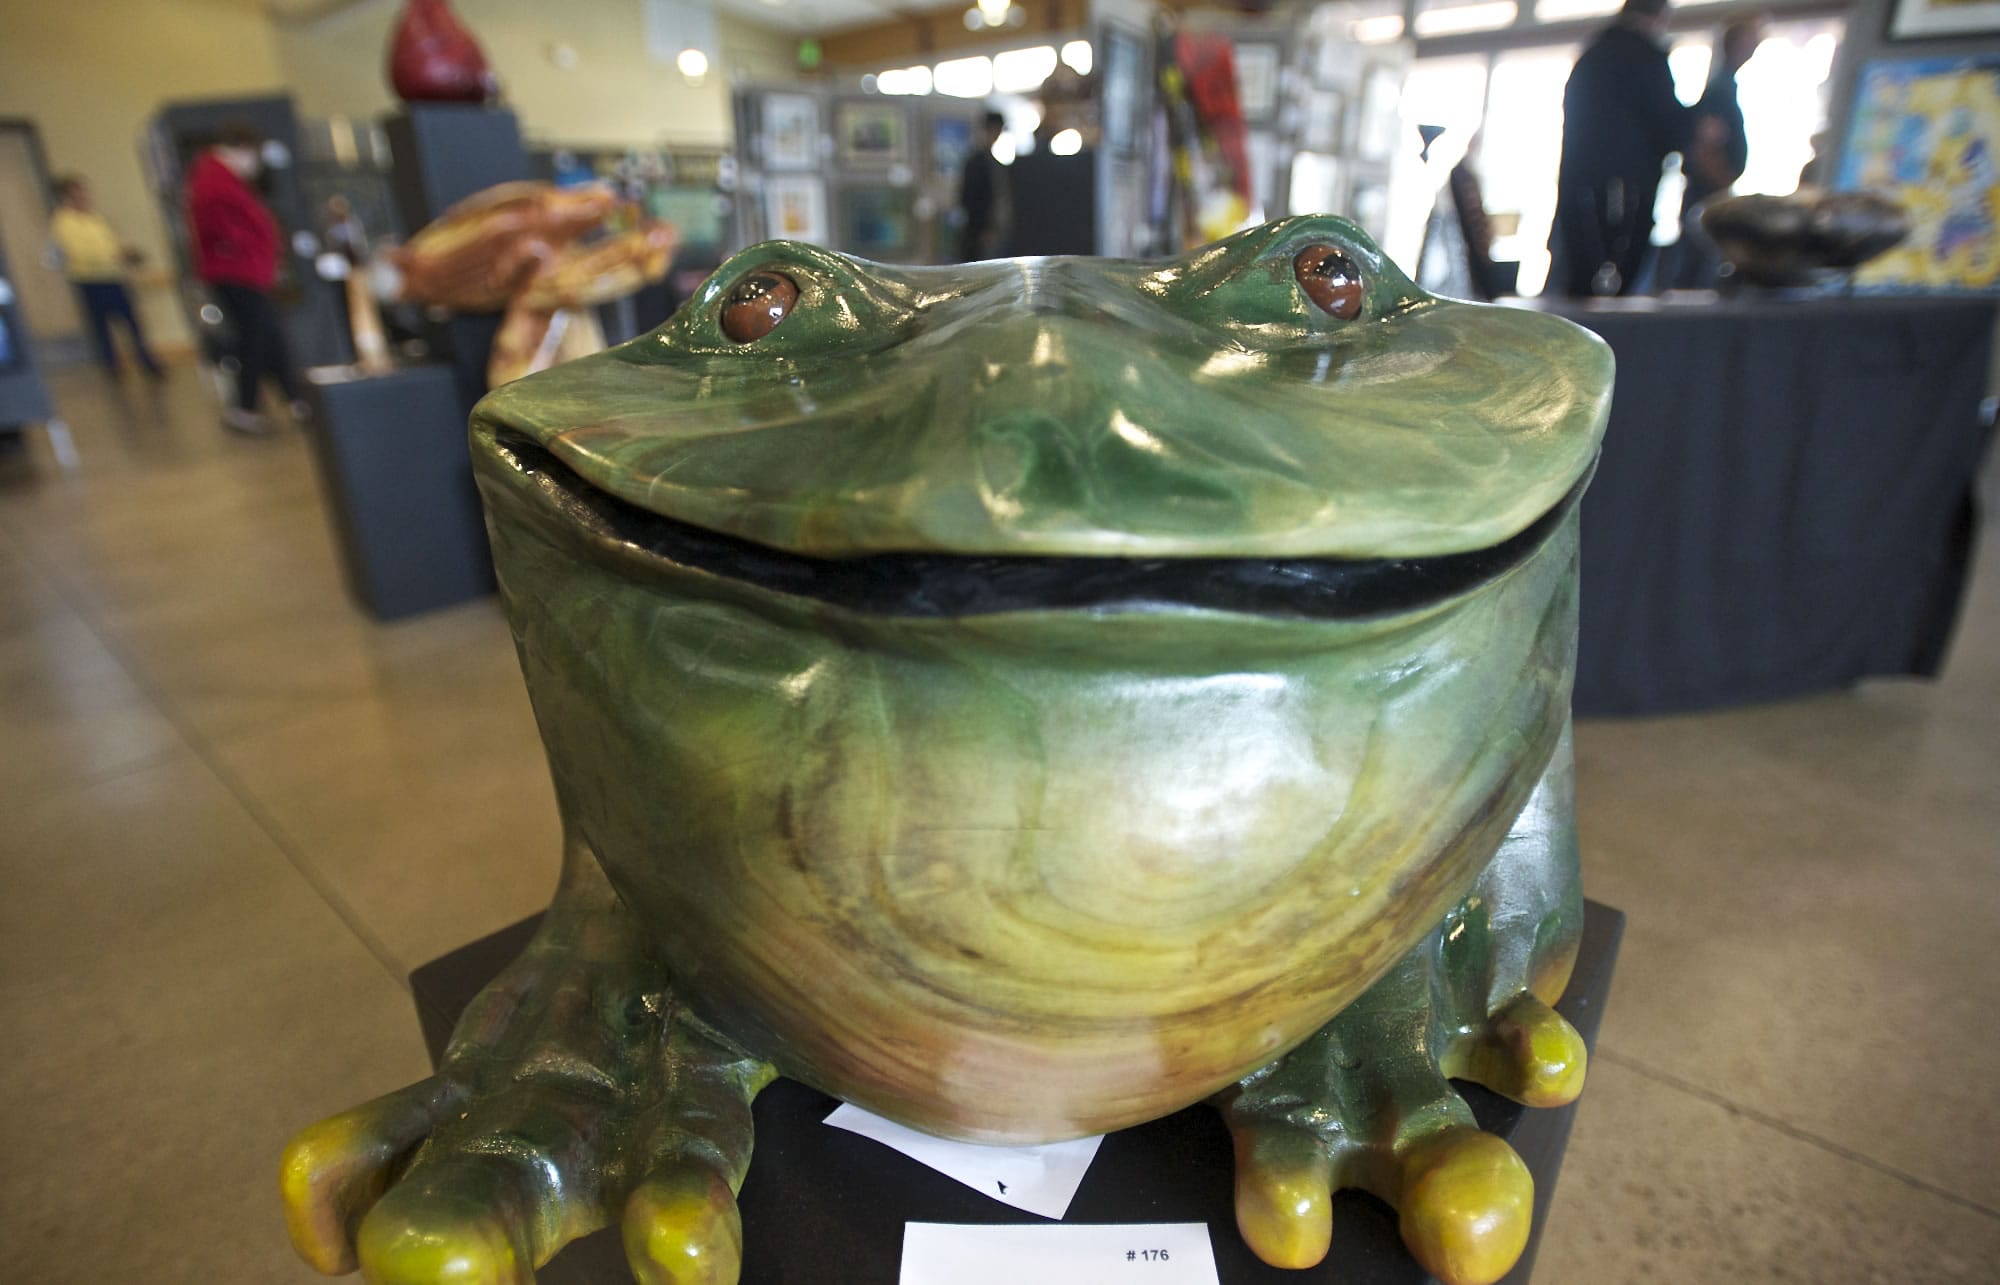 This large &quot;Frog,&quot; by artist Paul Gregurich, greeted art show visitors.